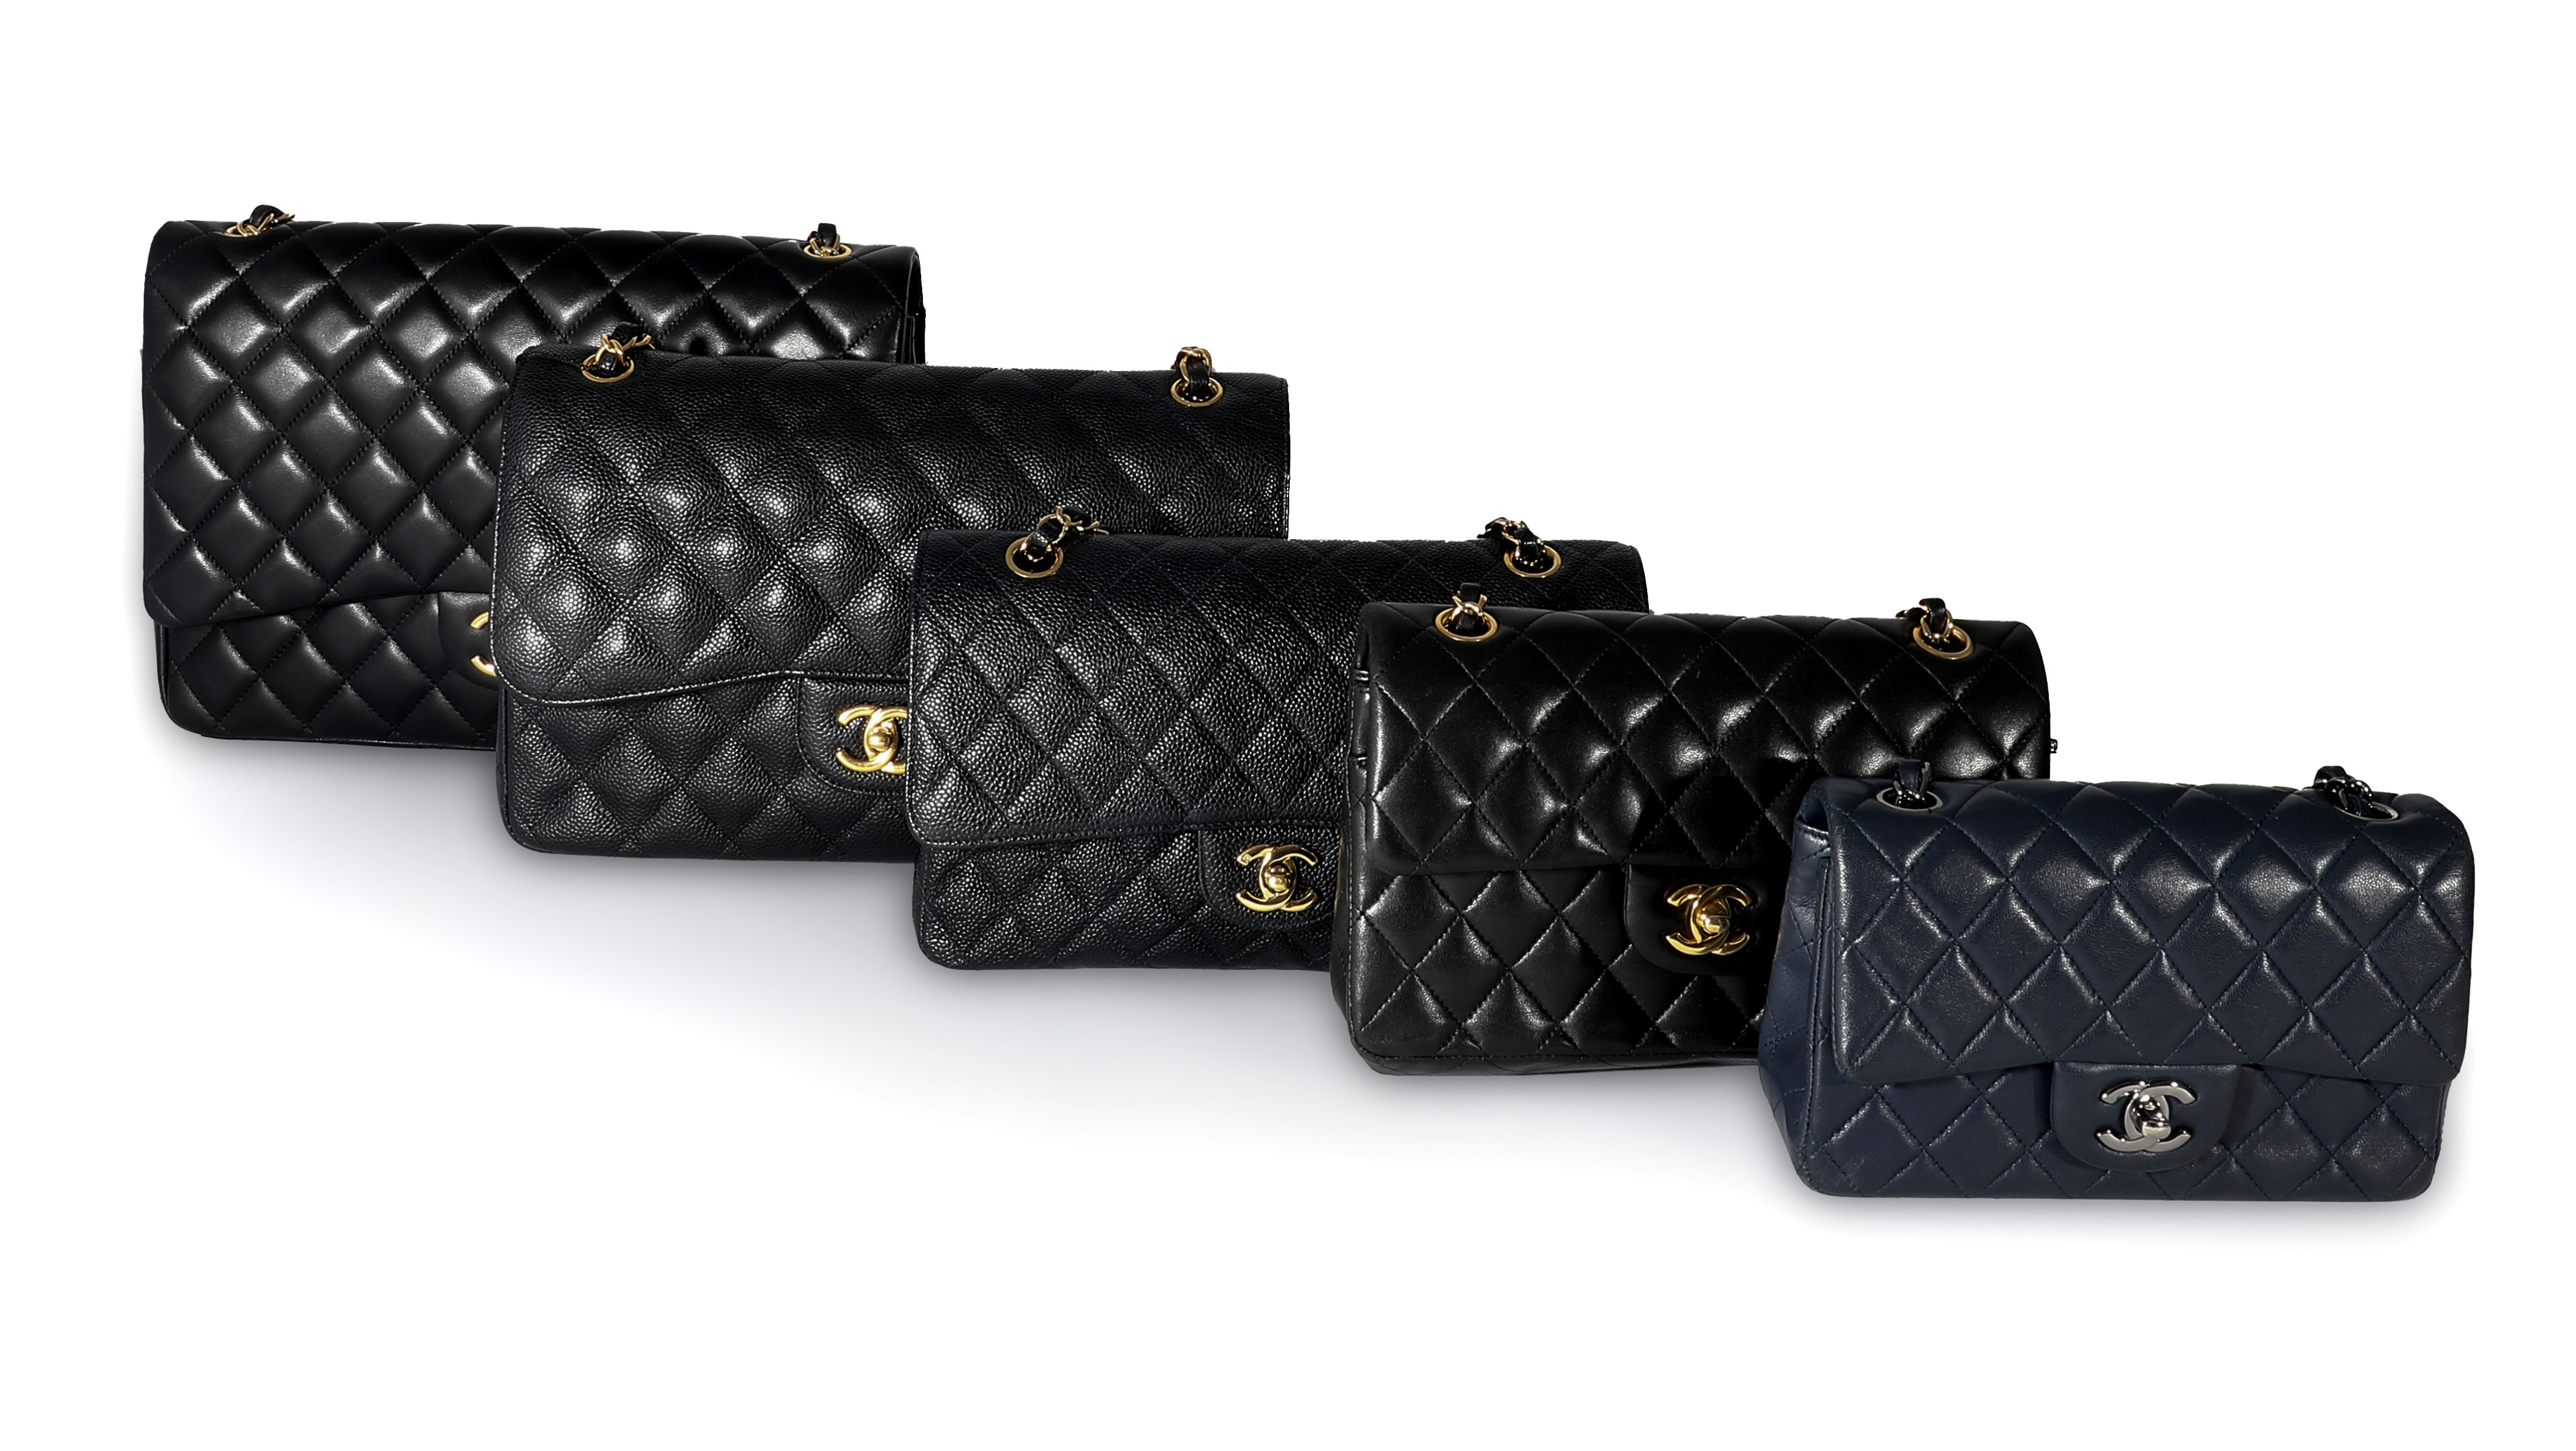 Guide To: Chanel Flap Bag Sizes, myGemma